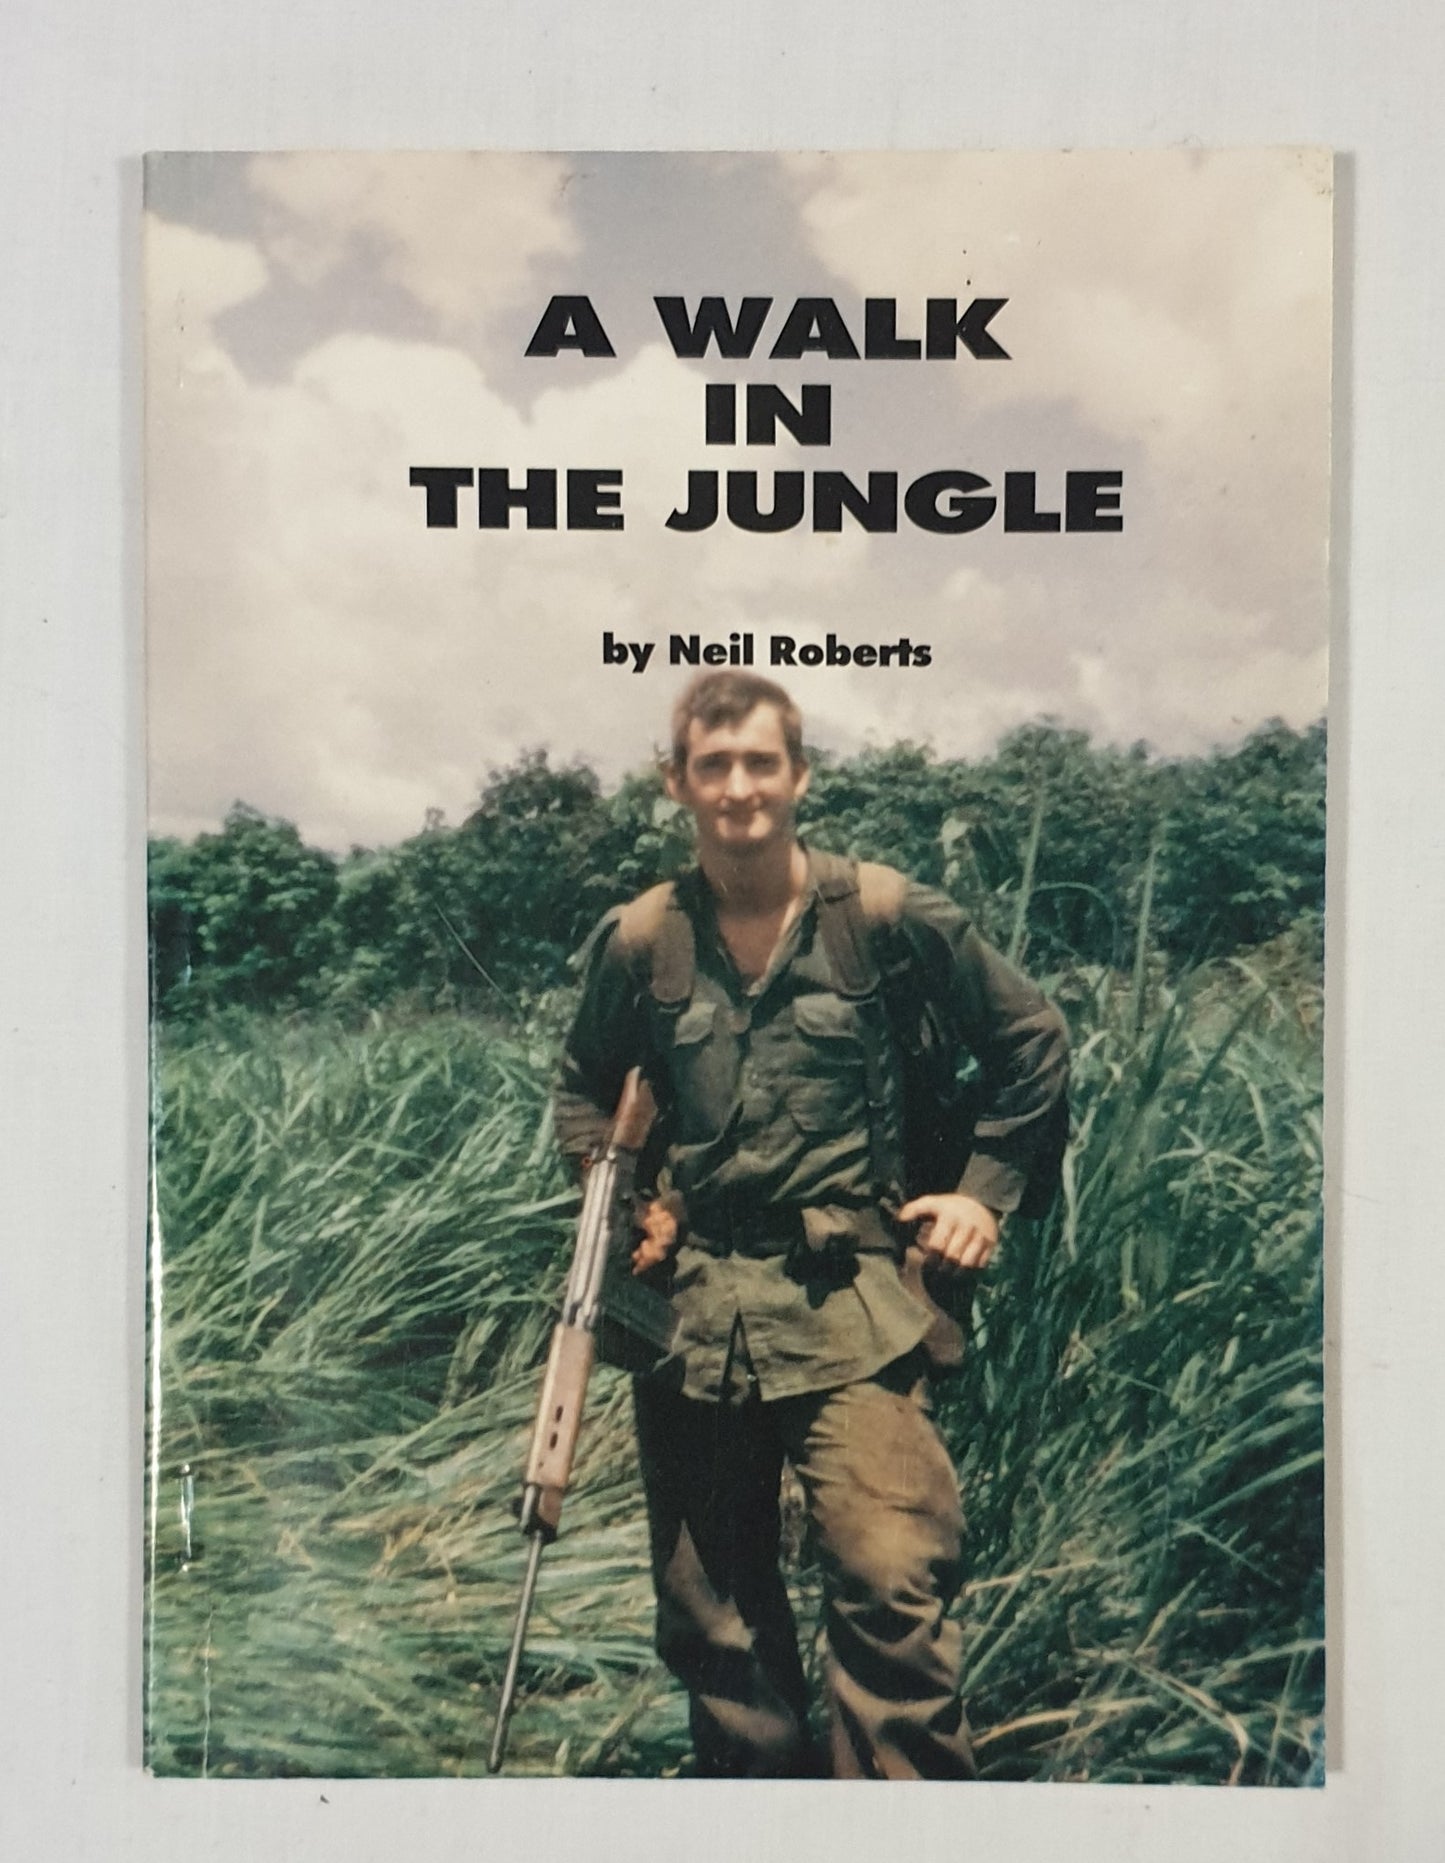 A Walk in the Jungle by Neil Roberts